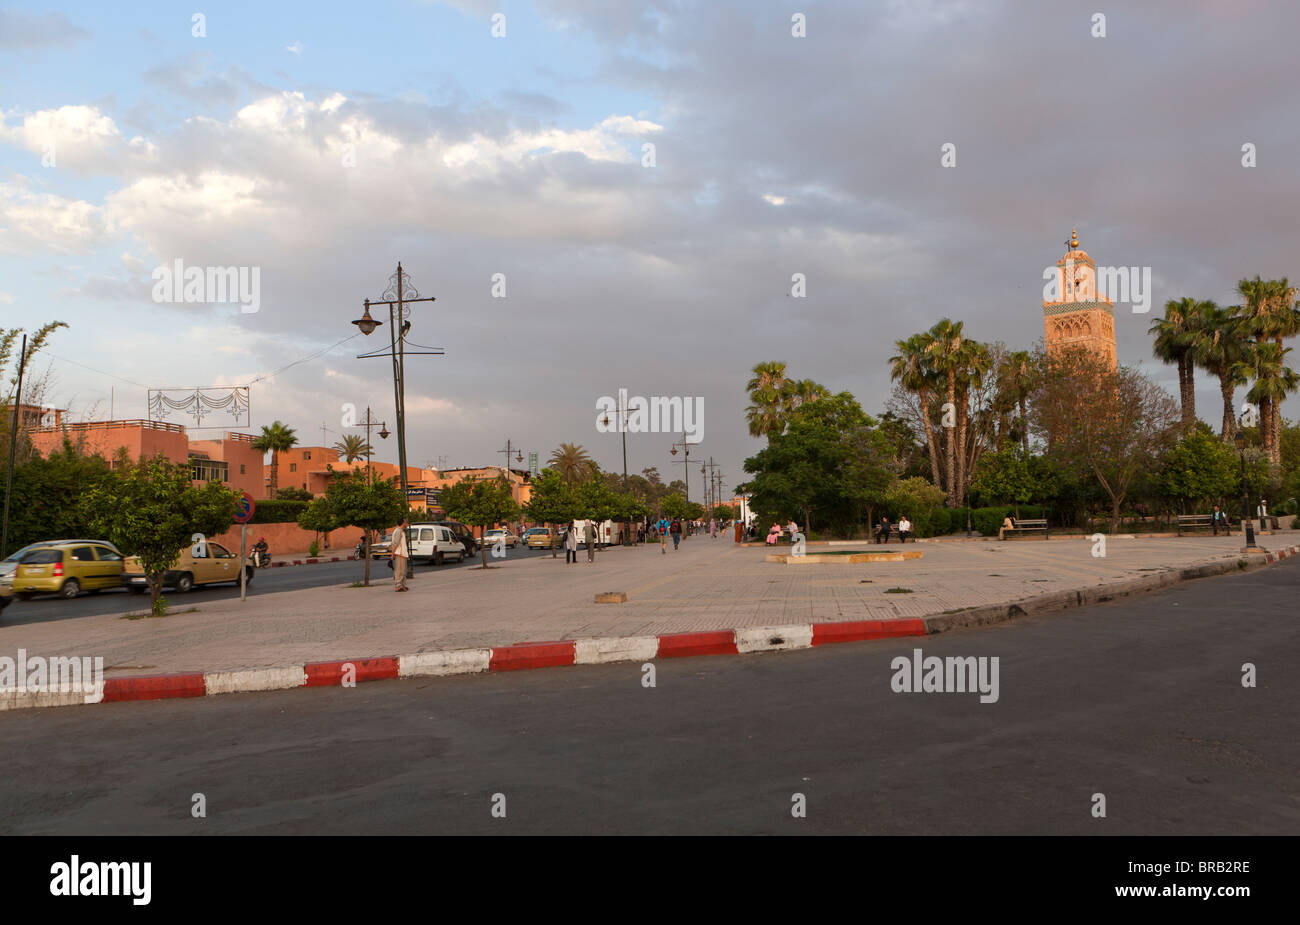 Minaret of the Koutoubia Mosque in Marrakech, Marrakesh, Morocco, North Africa Stock Photo